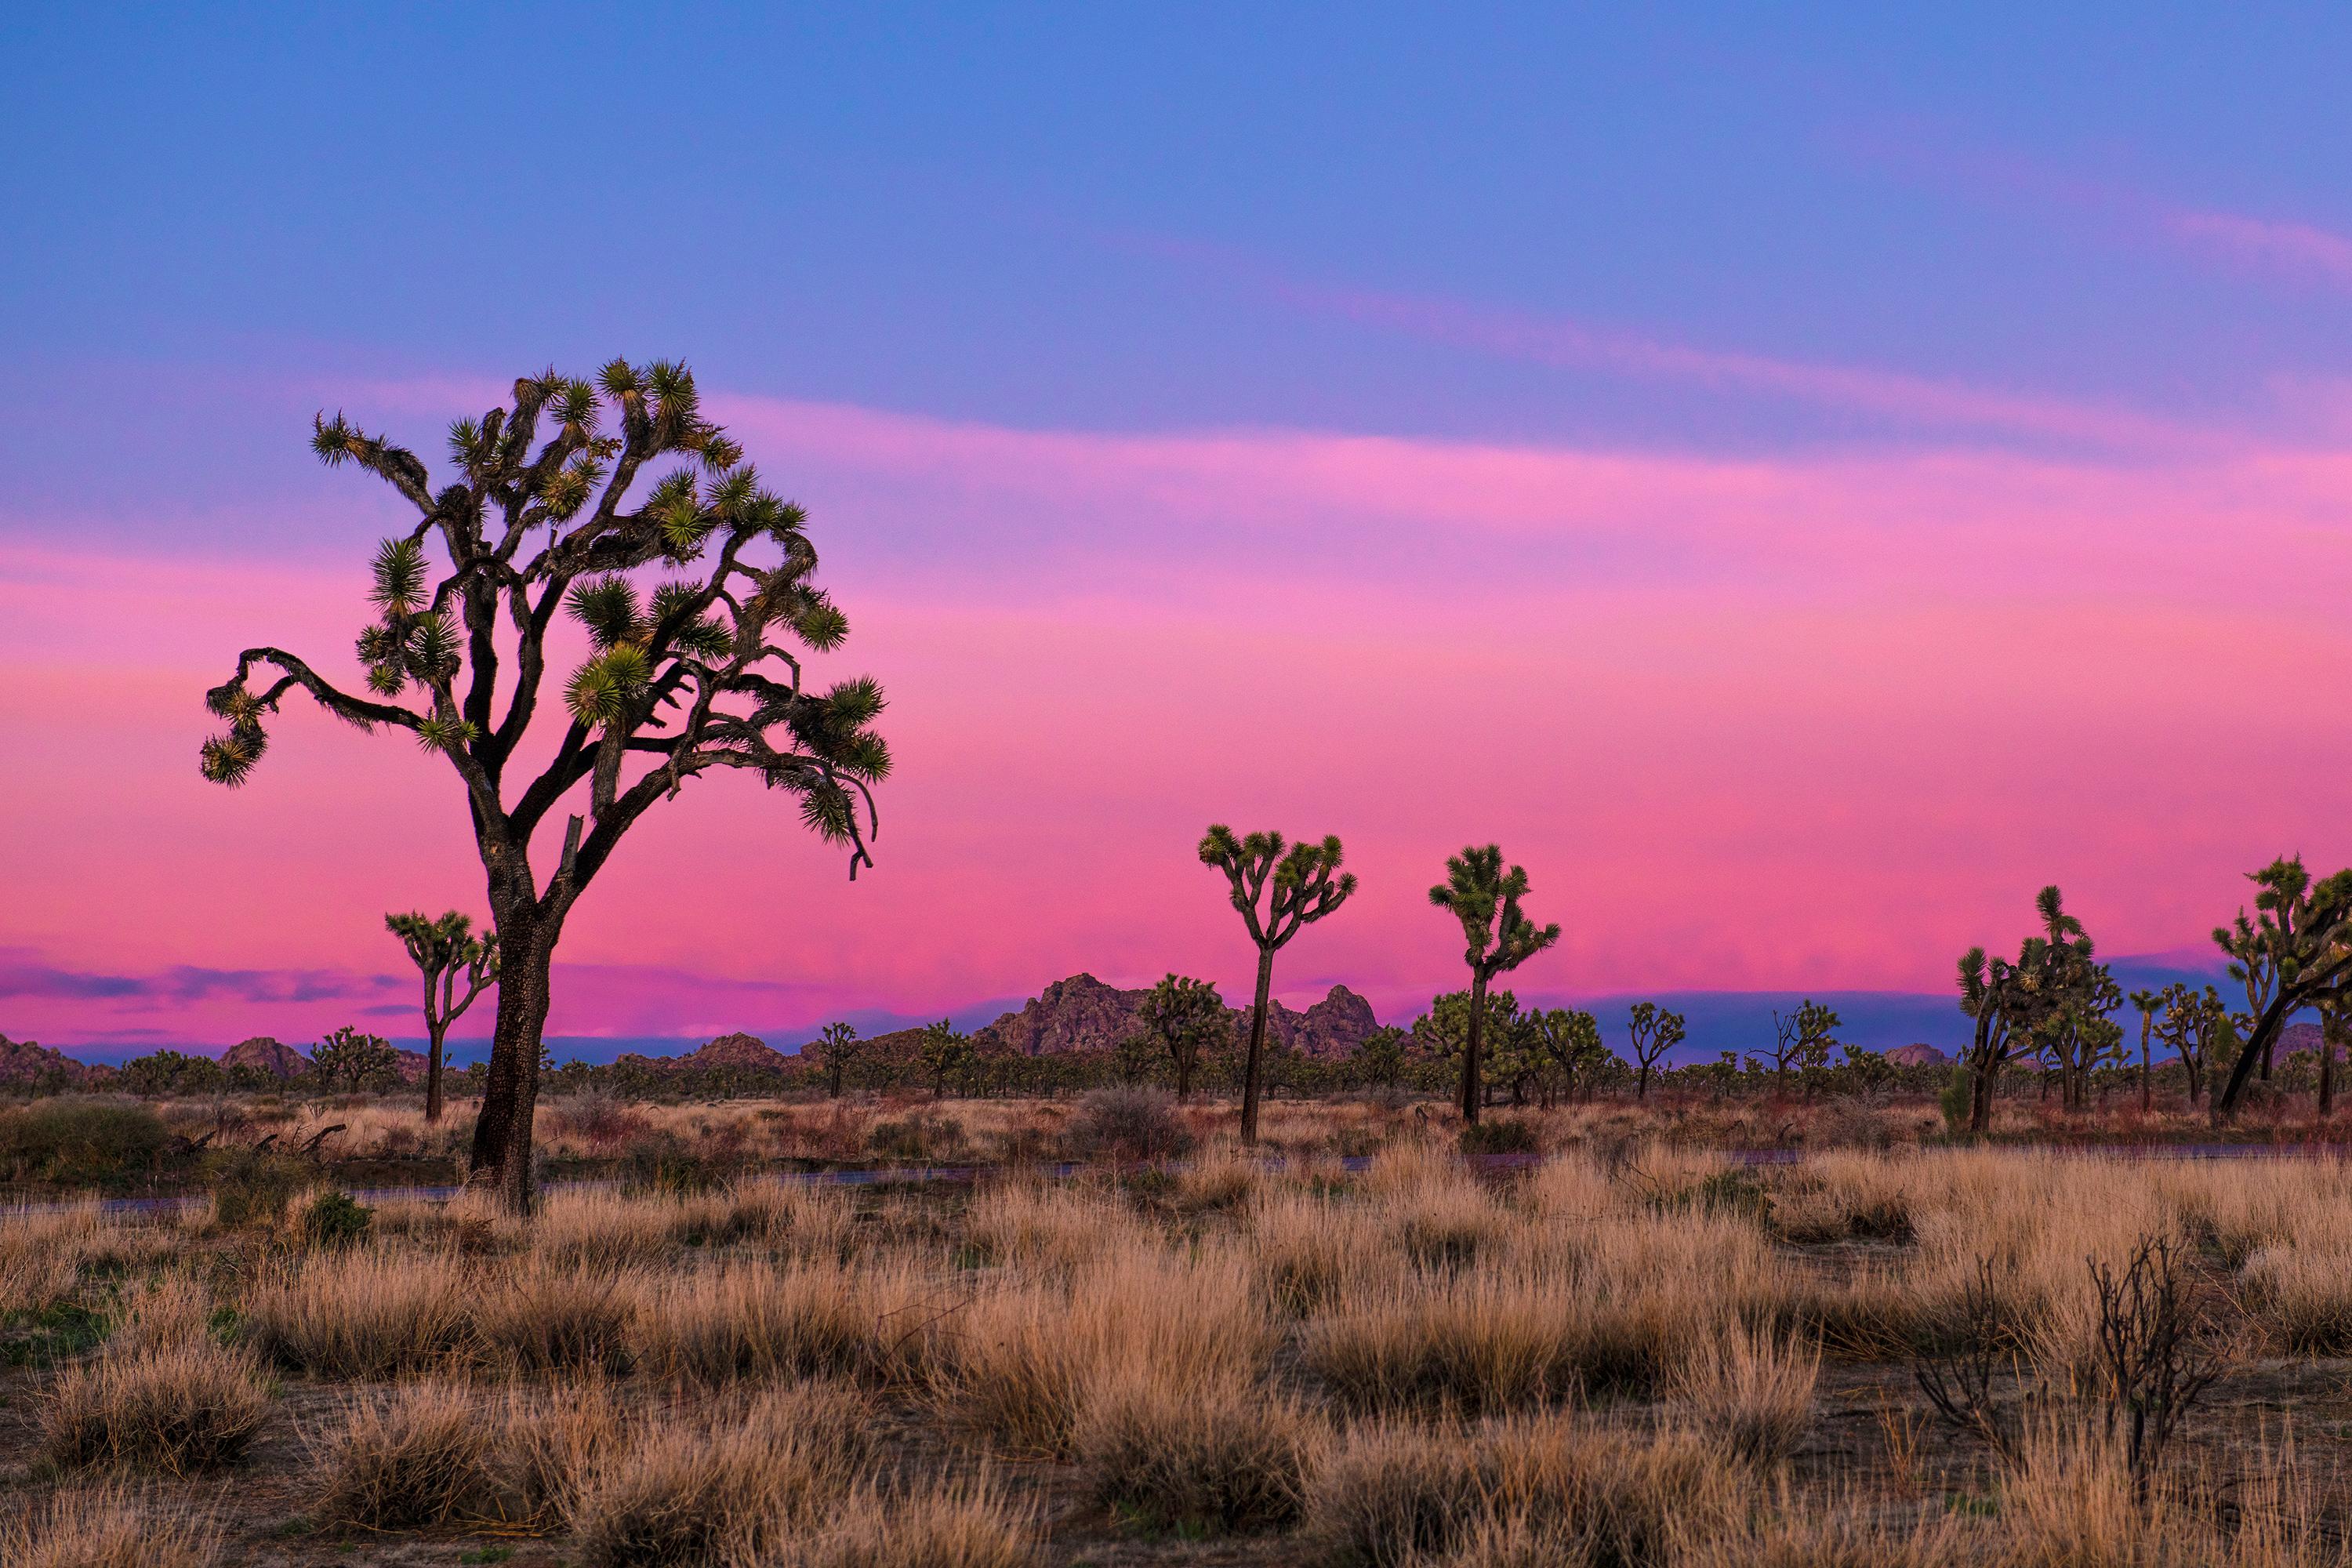 Joshua Tree National Park - Quail Springs Area at Sunset - Credits: NPS / Emily Hassell